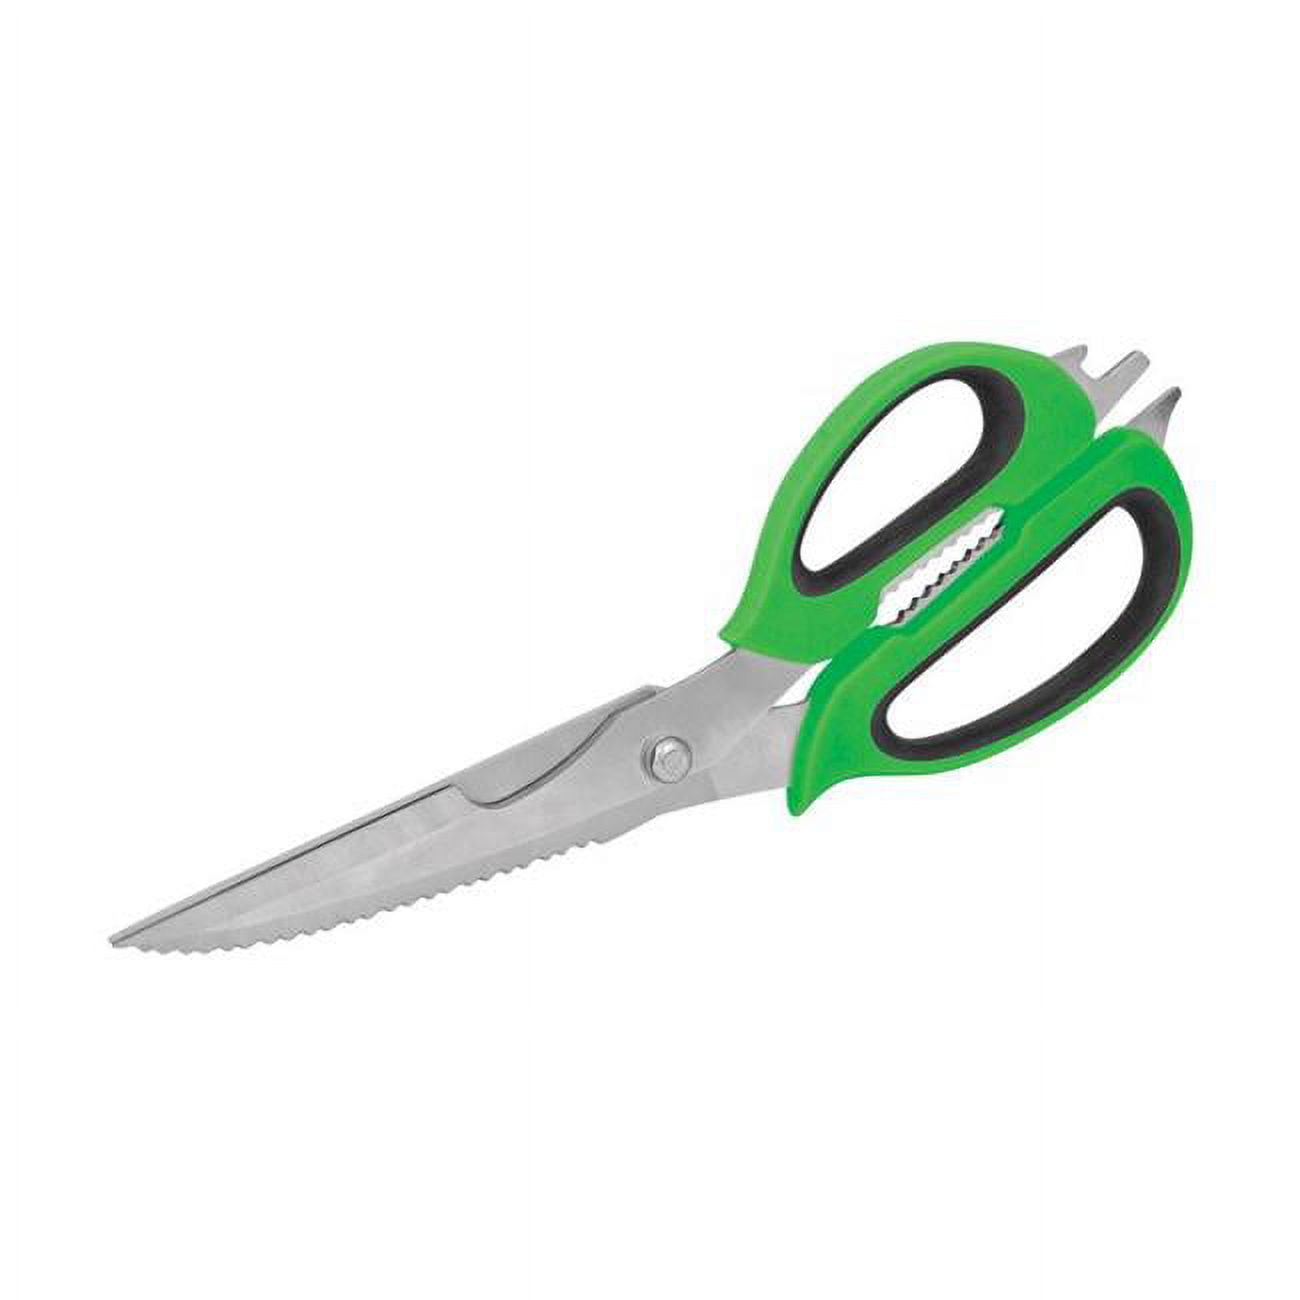 Picture of Wilmar 2797769 11.5 in. Stainless Steel Serrated 9-in-1 Multi-Function Shears - Green